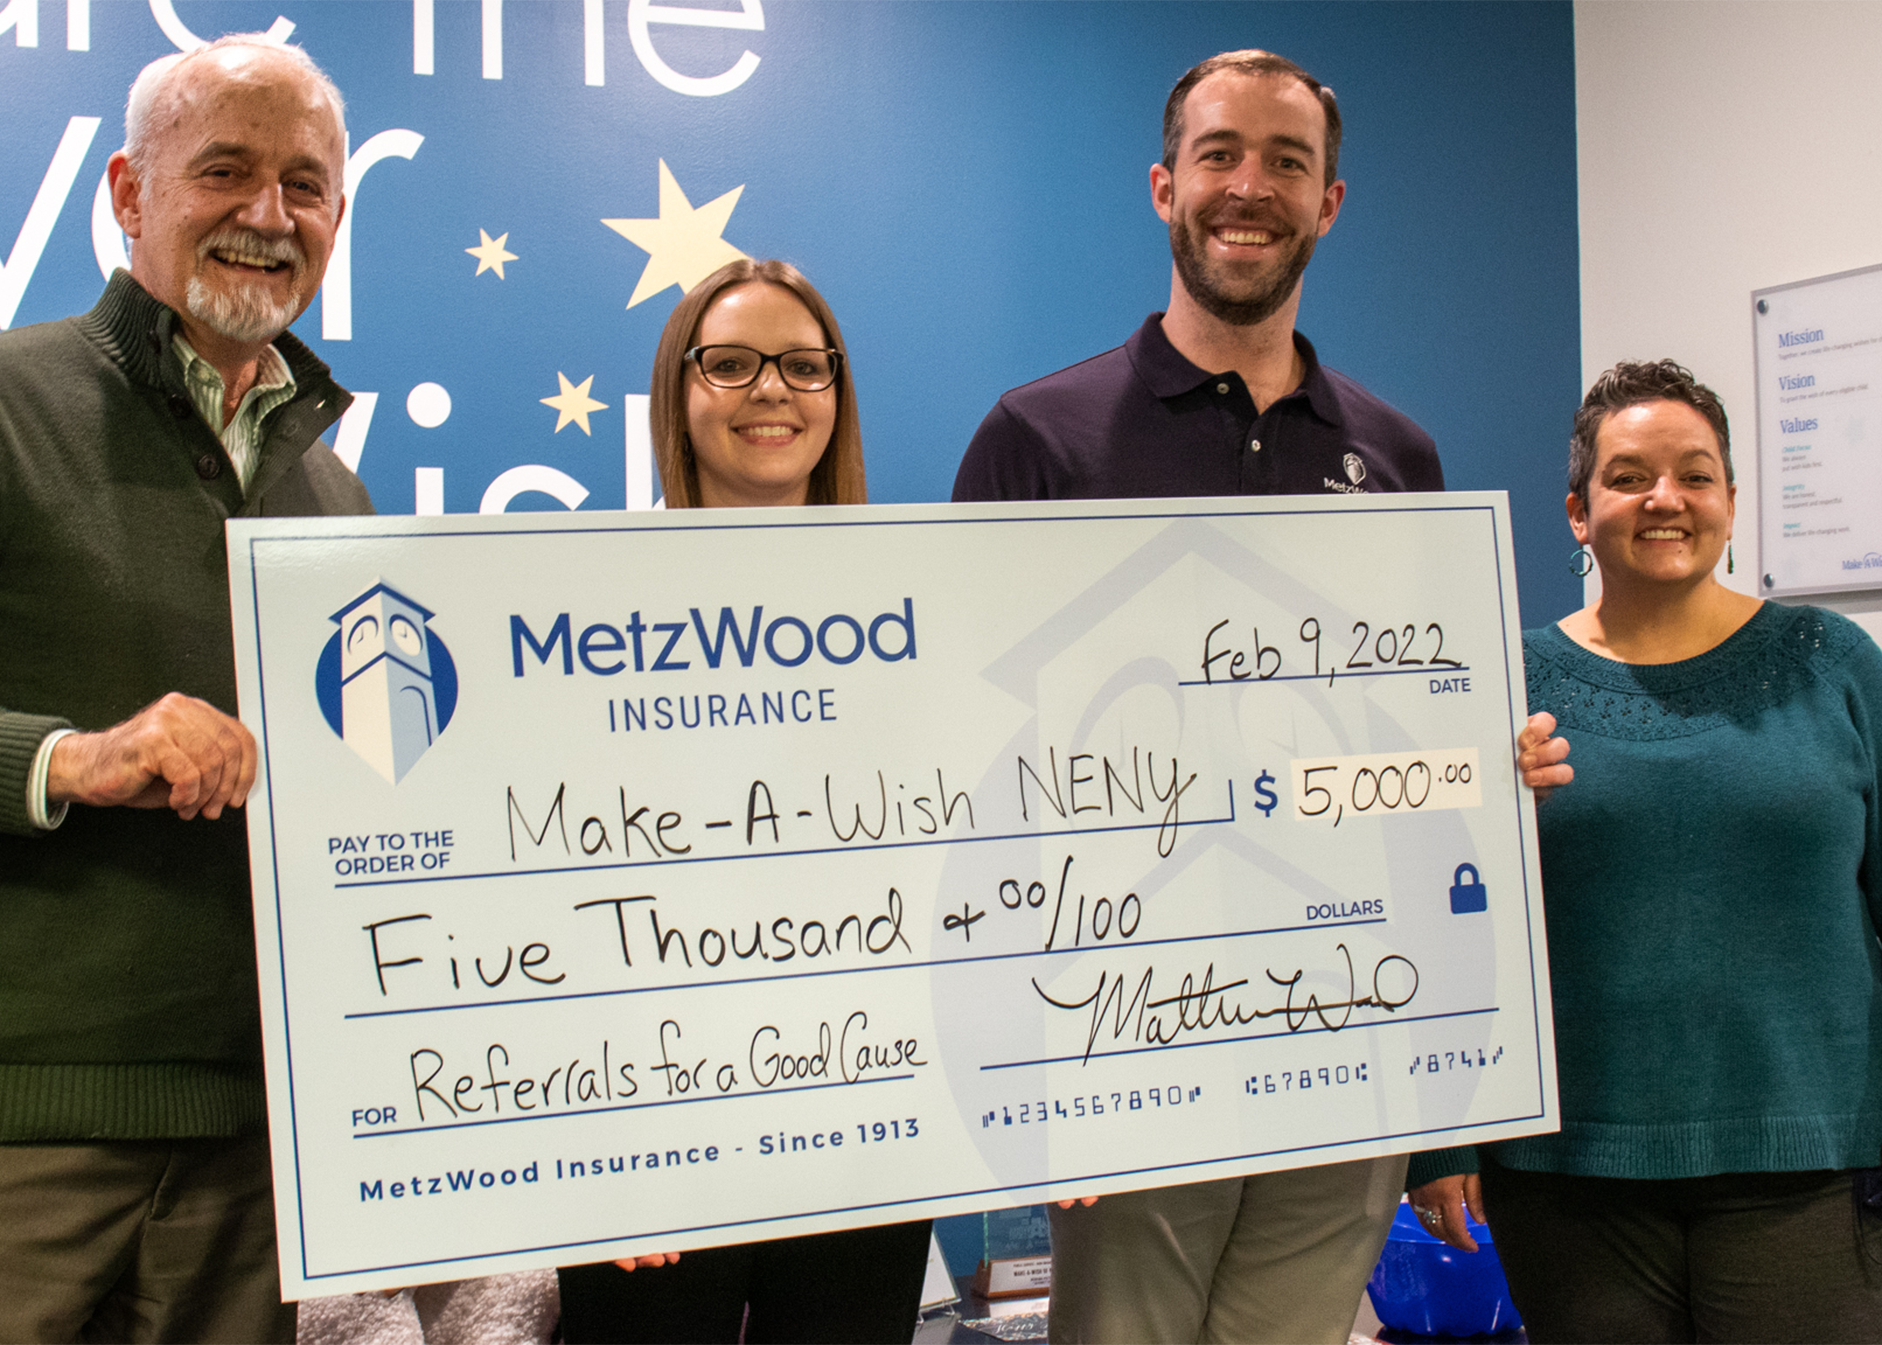 MetzWood Insurance presenting a donation check to Make-A-Wish Northeast New York